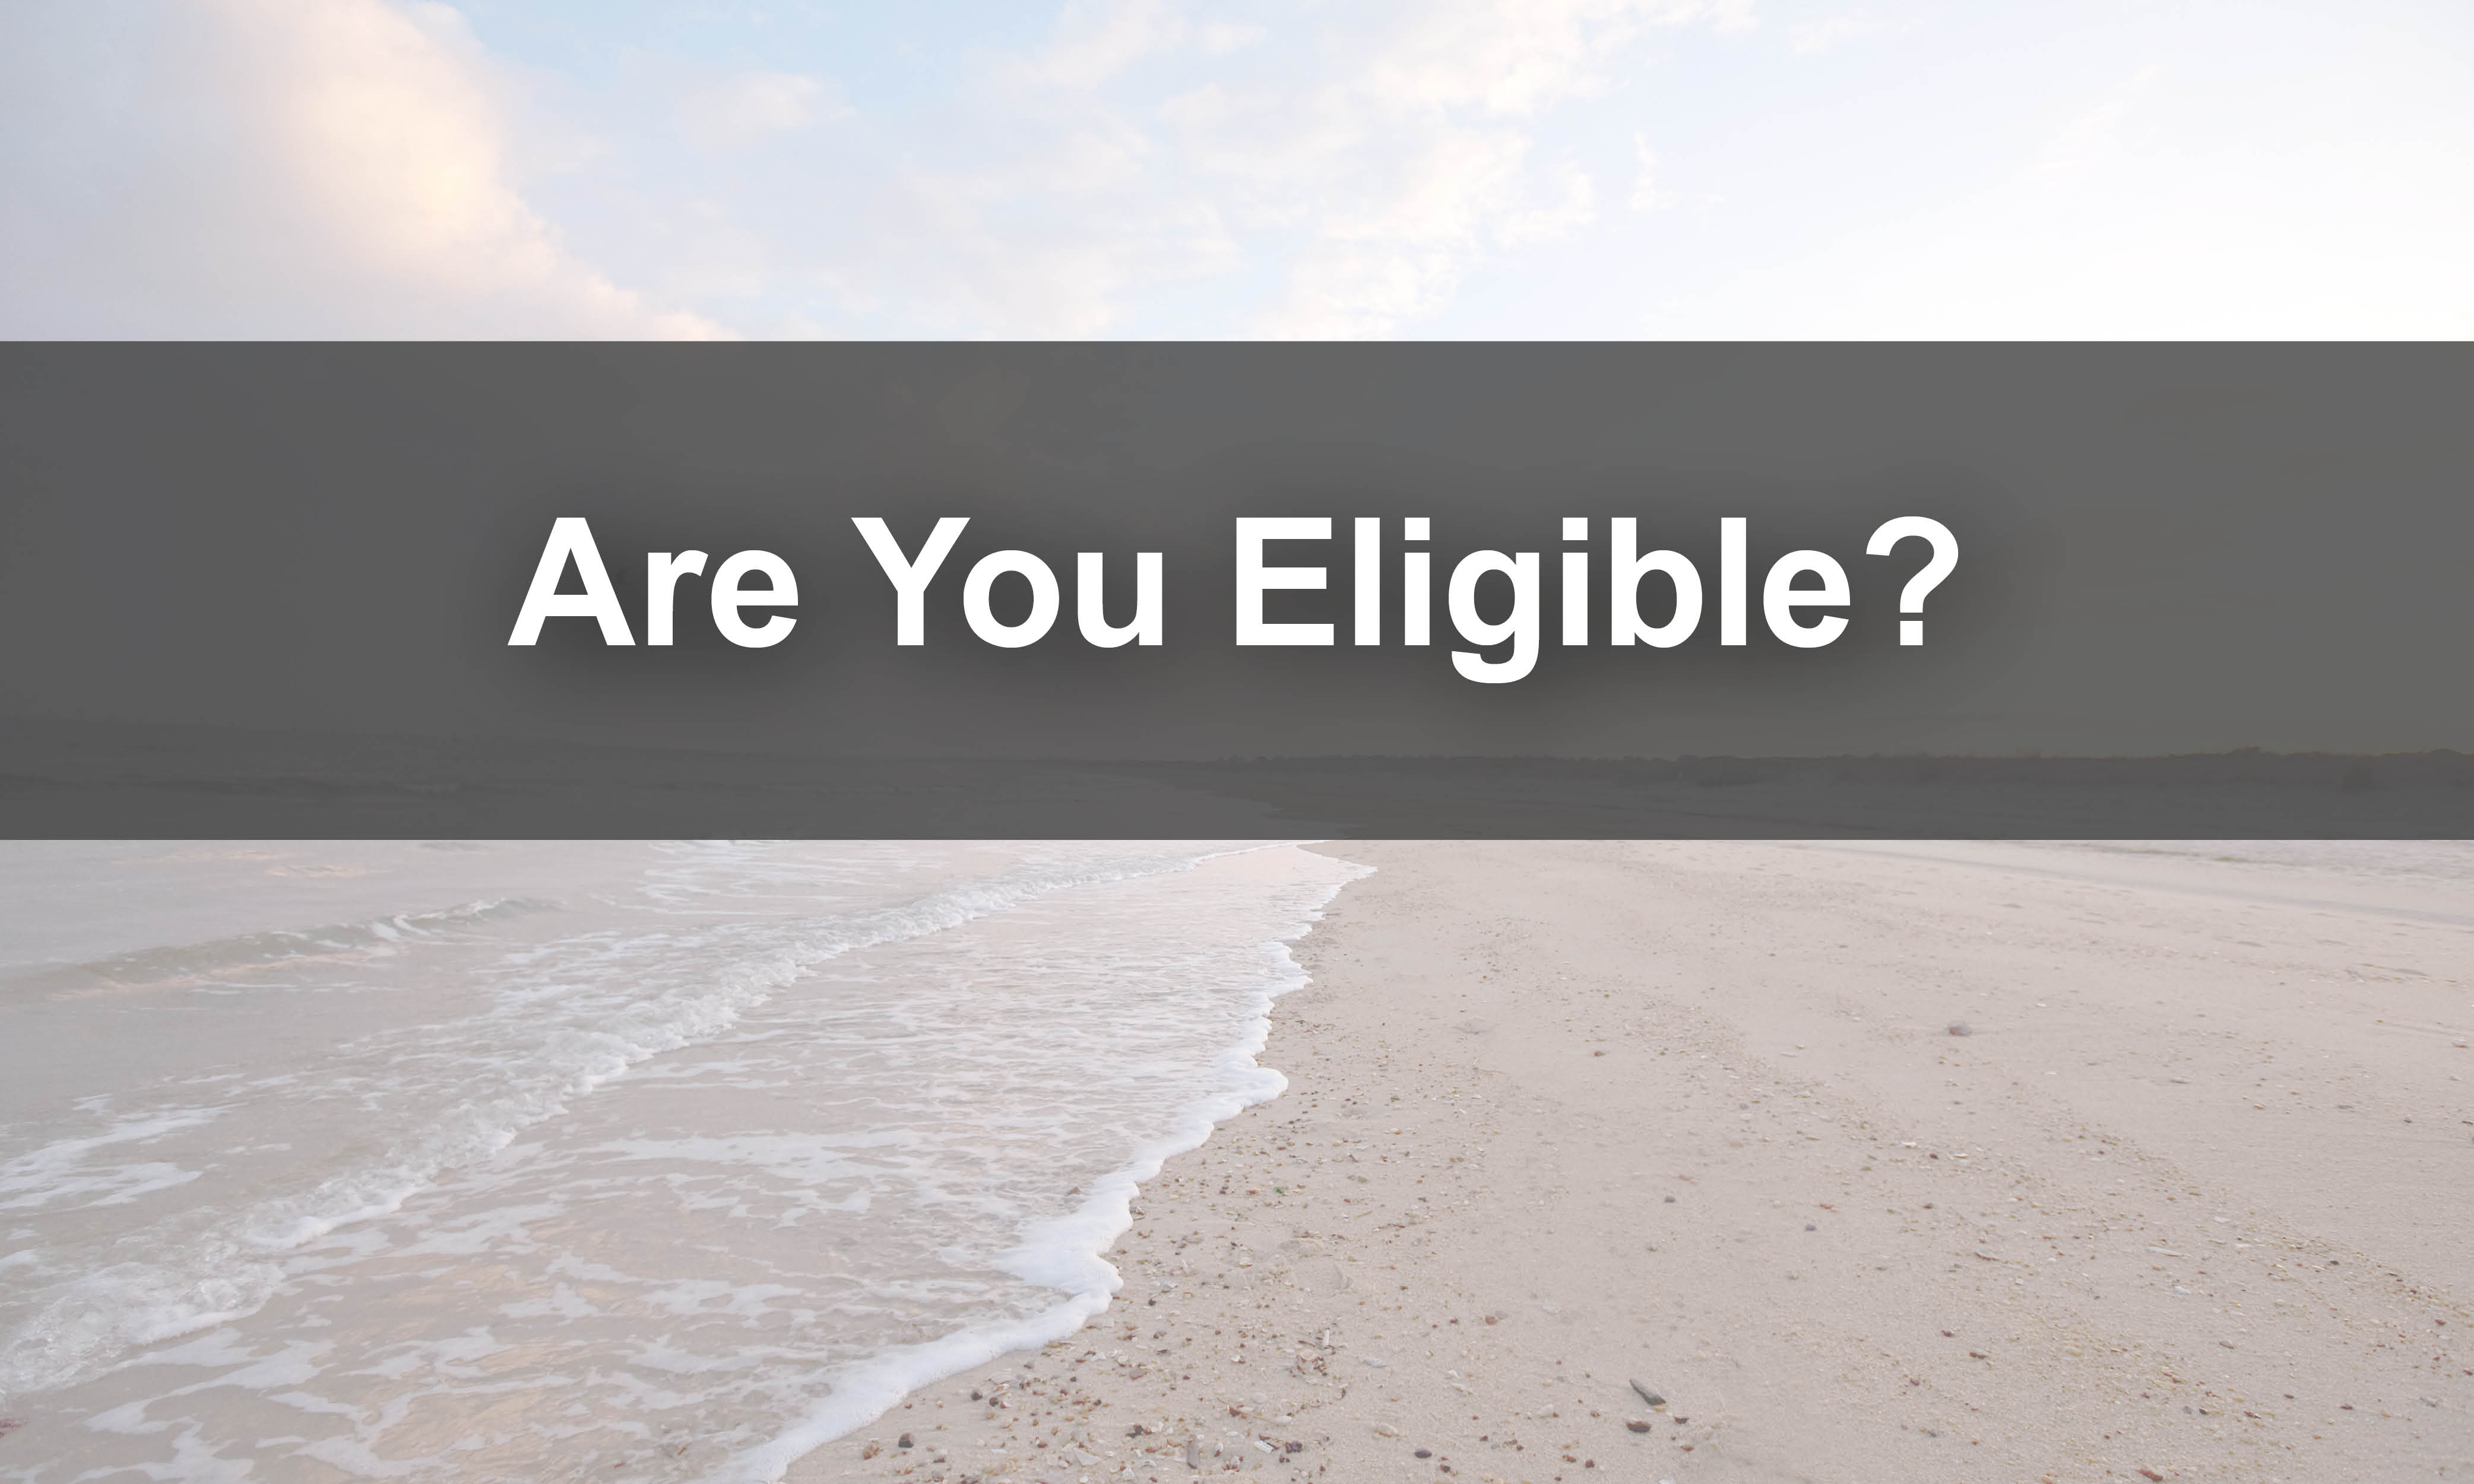 Link to eligibility requirements